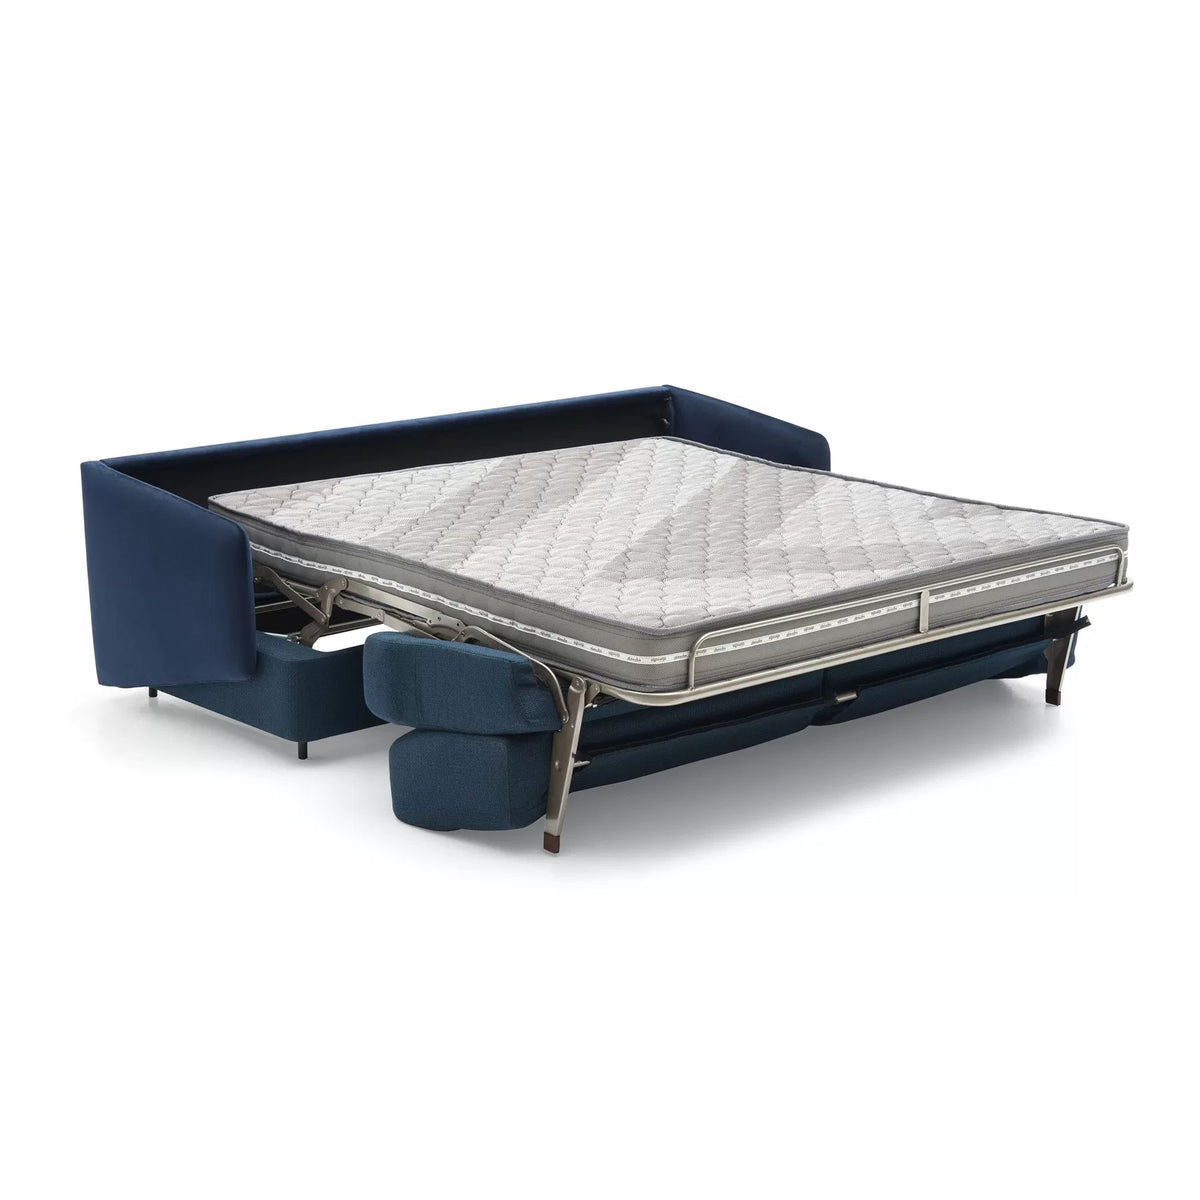 Abra 944 Sofa Bed-TM Leader-Contract Furniture Store